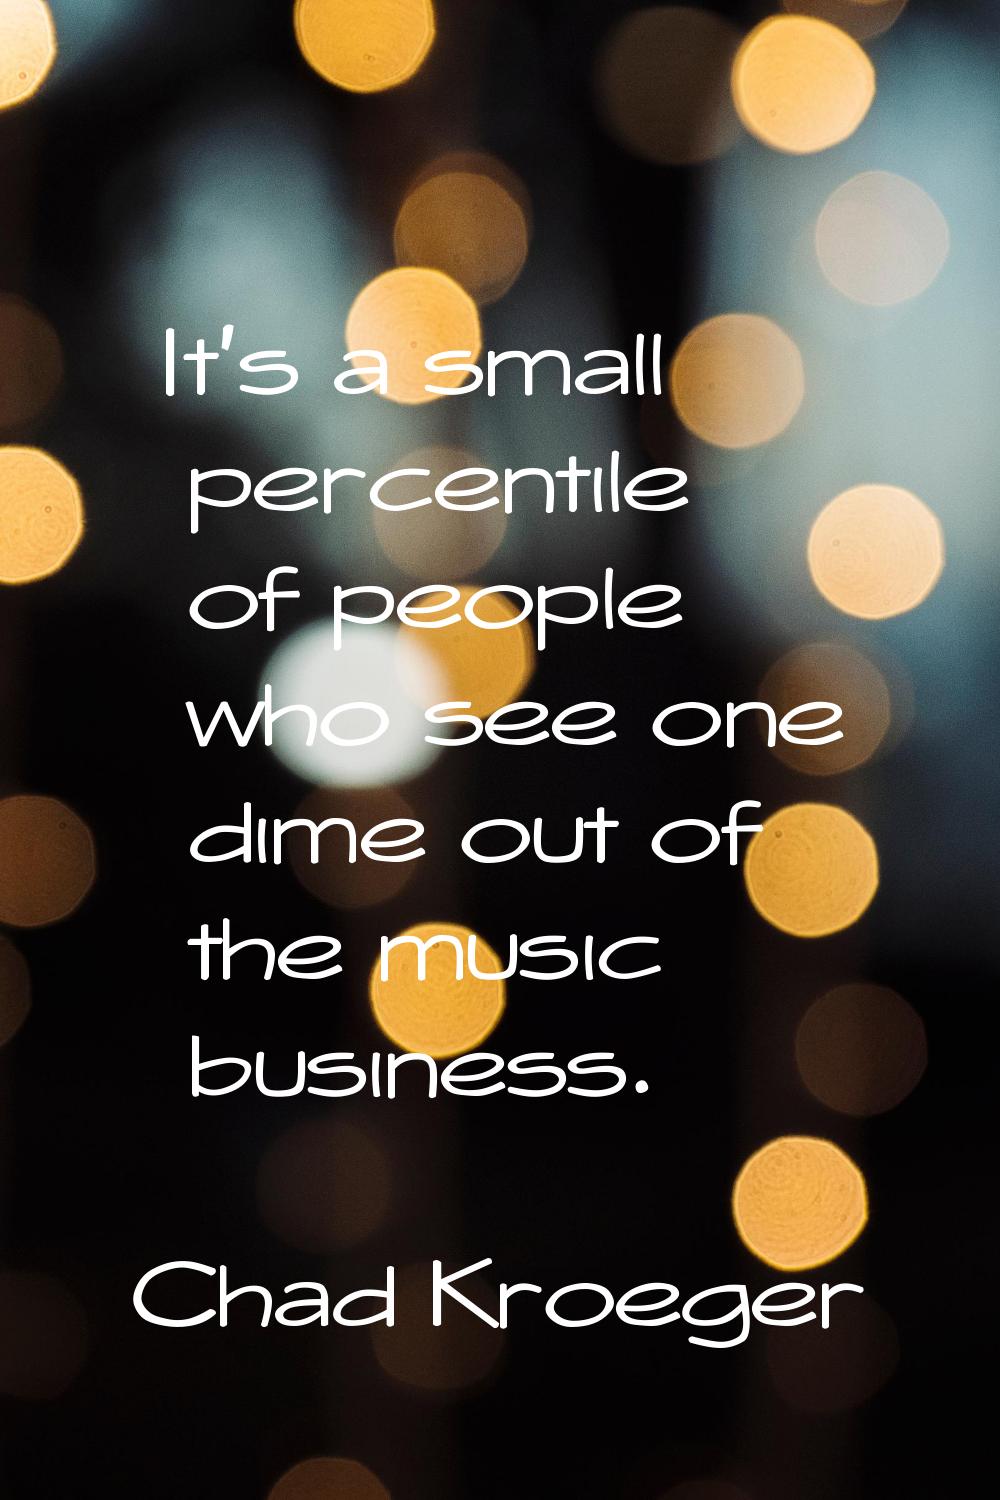 It's a small percentile of people who see one dime out of the music business.